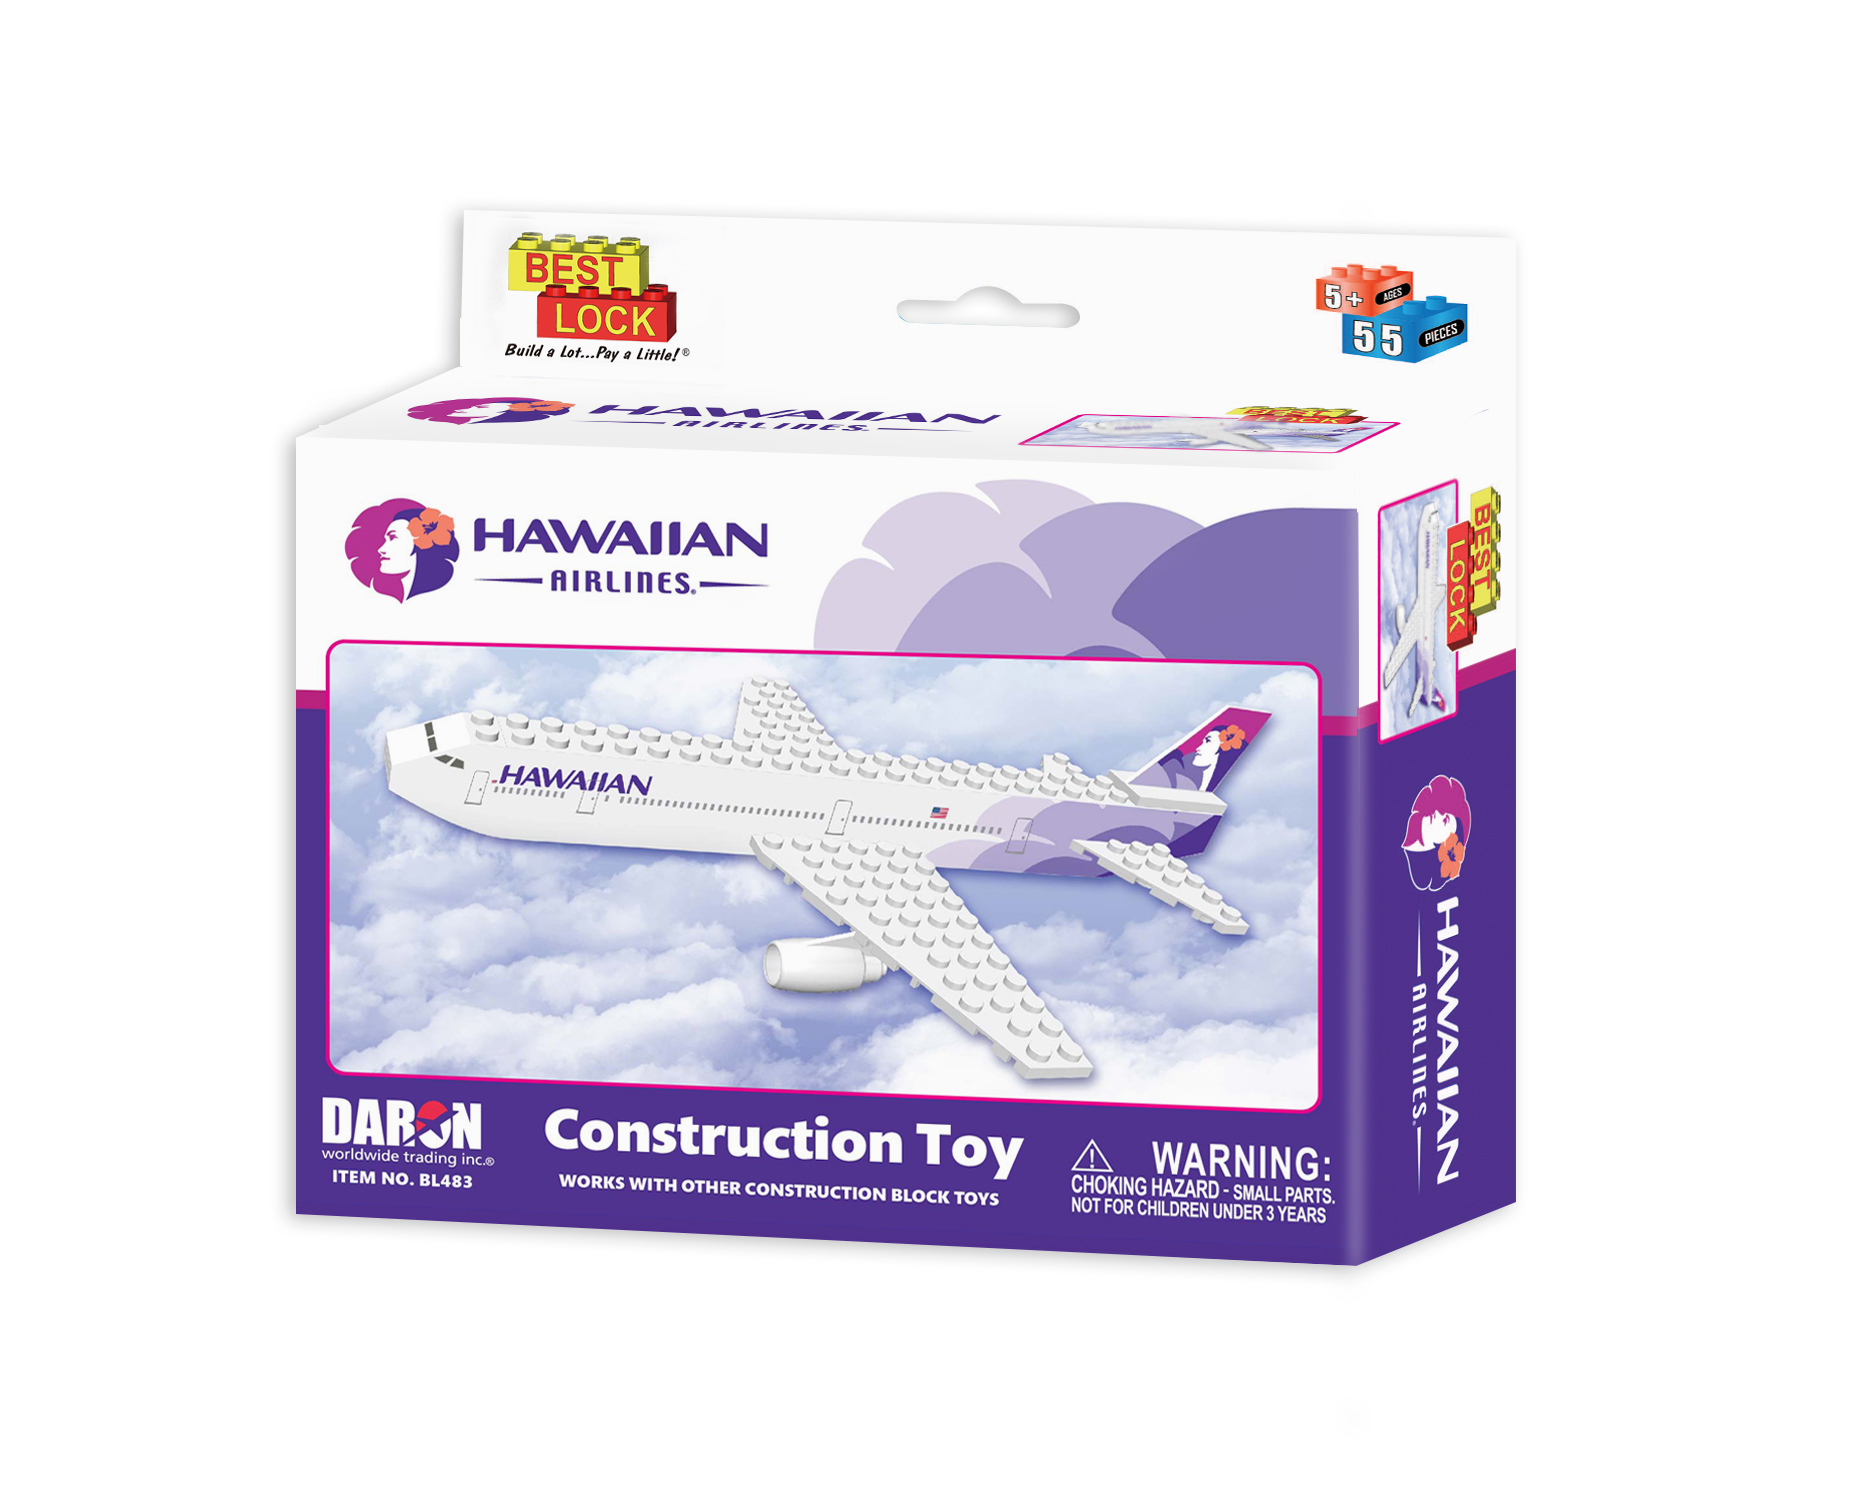 BL483 - "hawaiian Airlines 55 Piece Construction Toy"